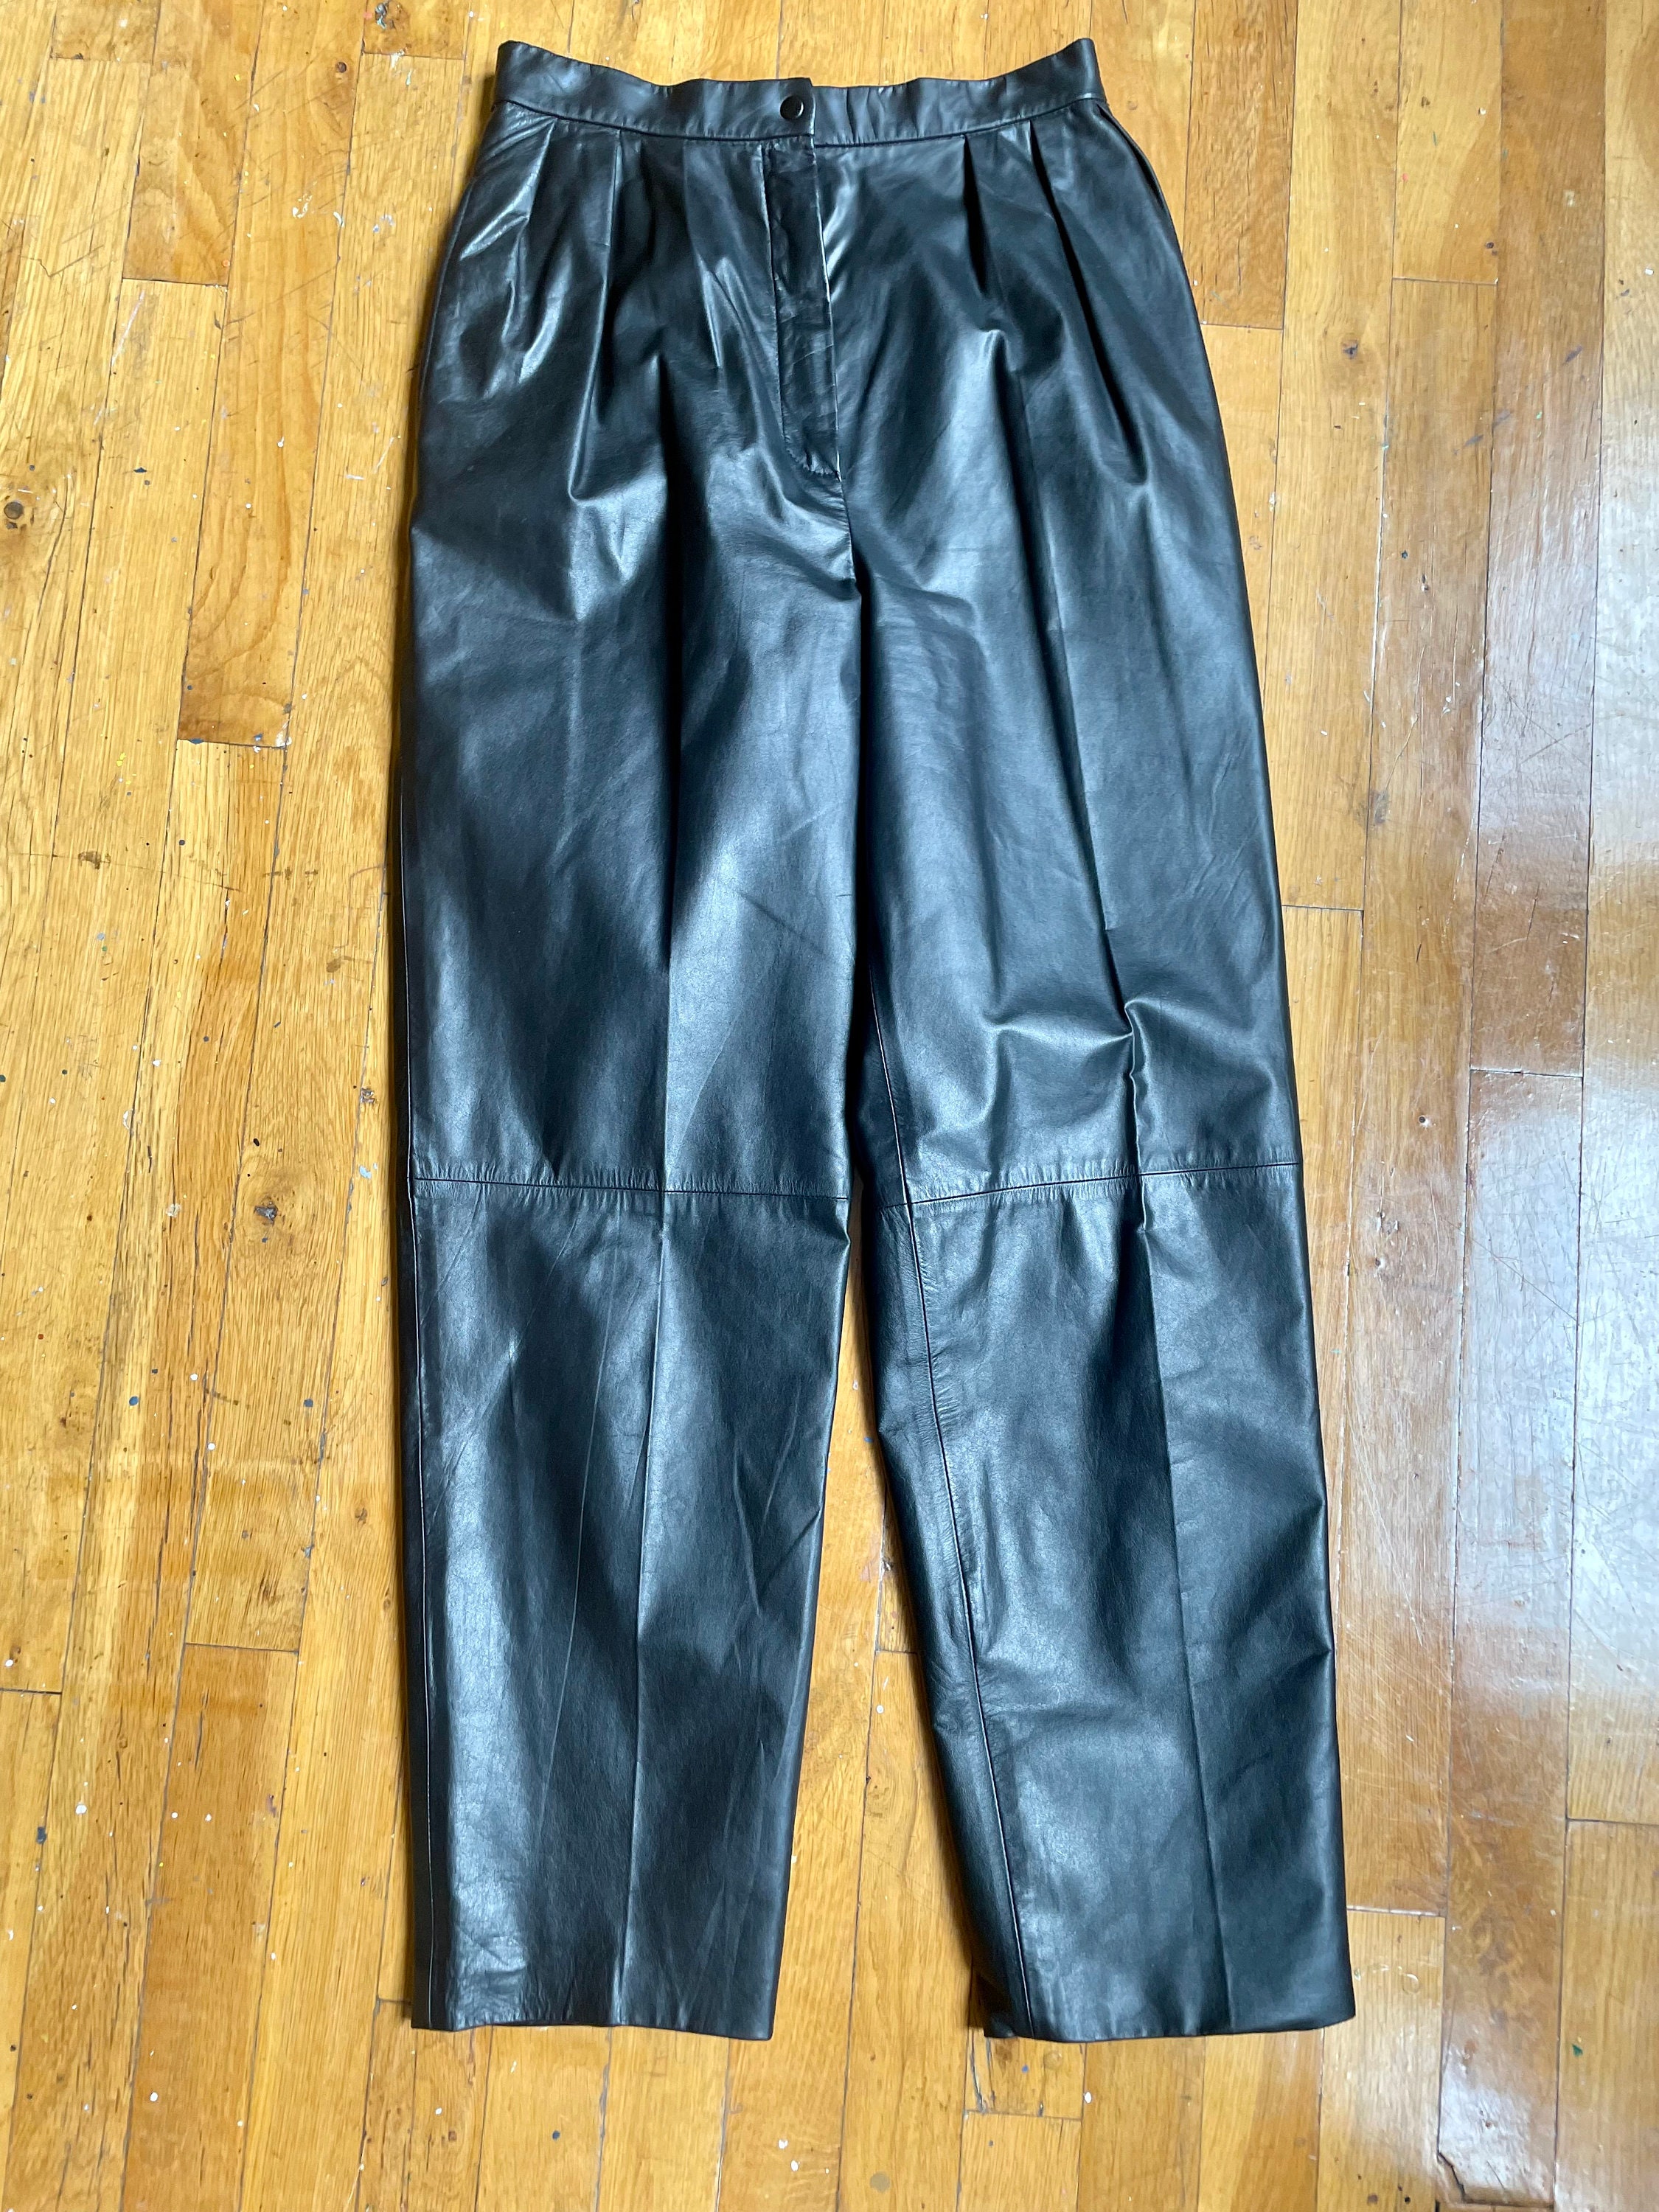 Vintage 1980s Black Leather High Waisted Pants - Etsy